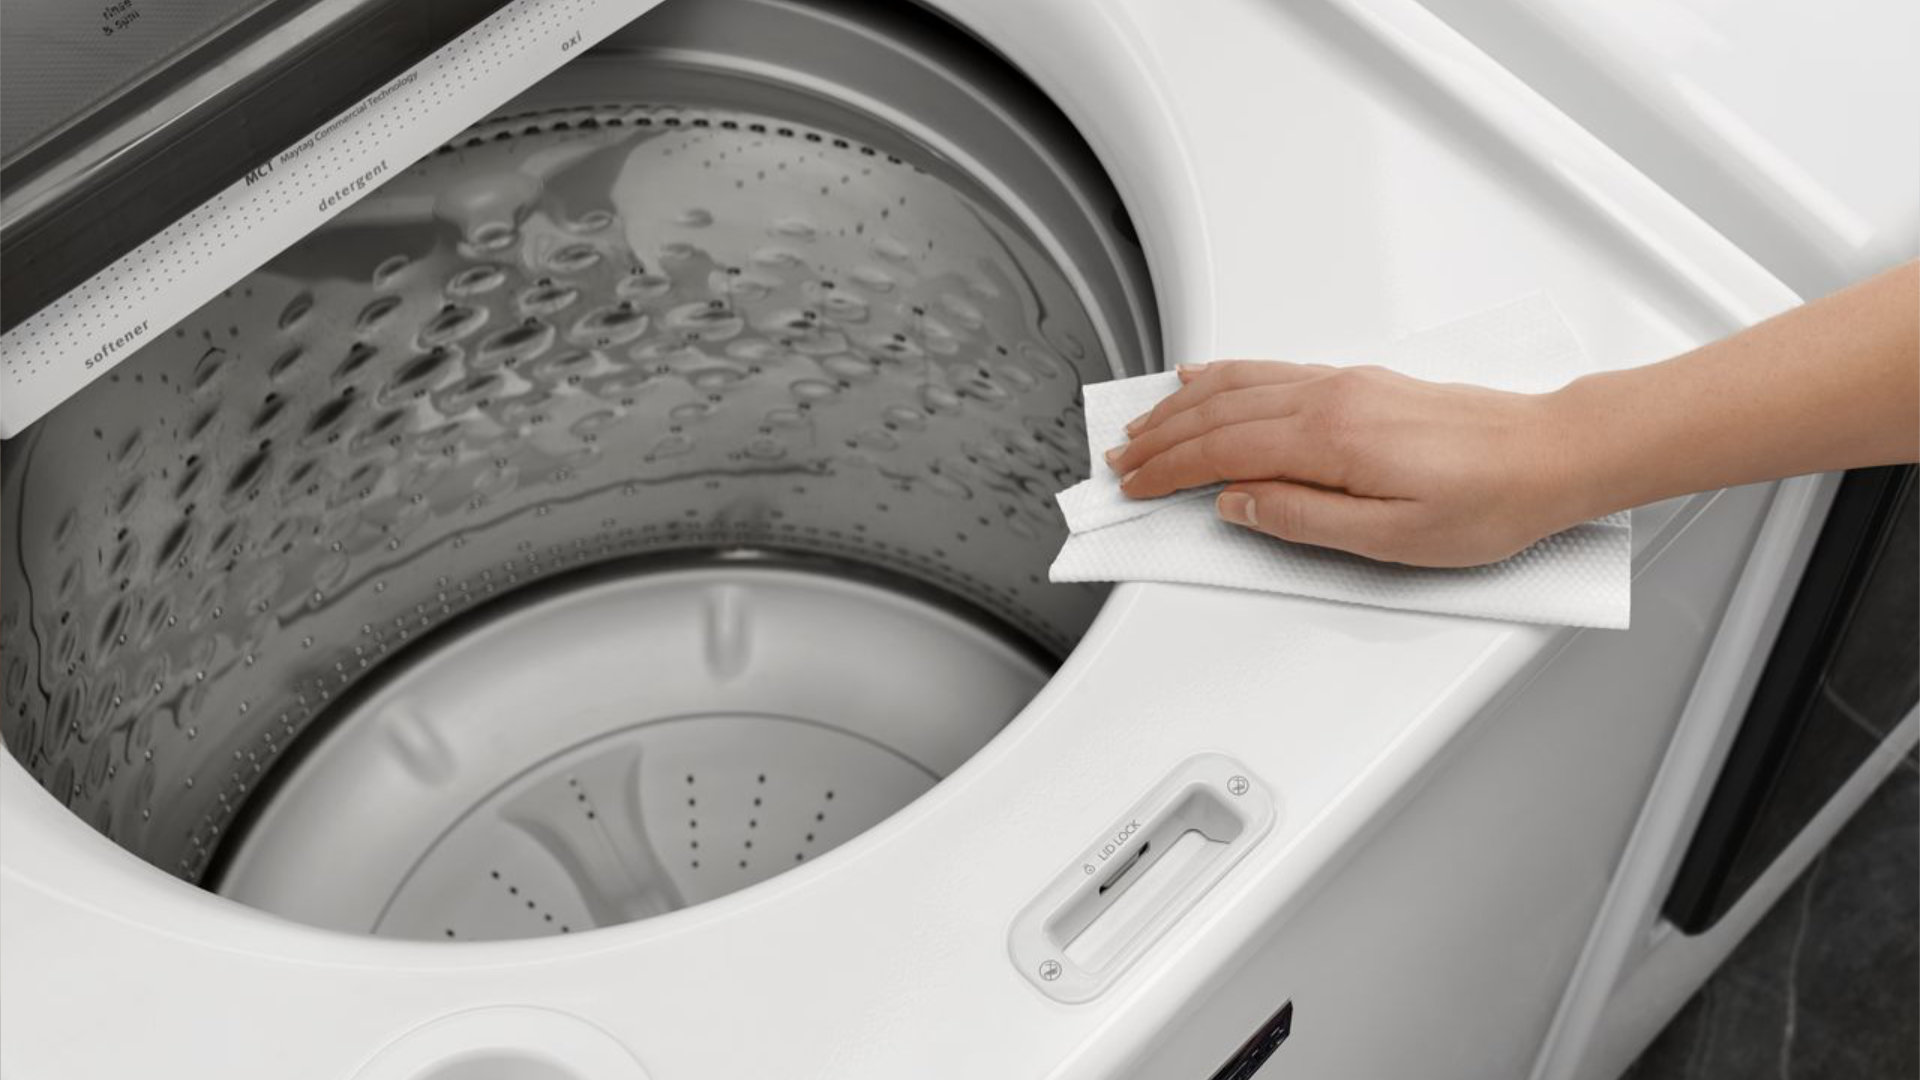 How To Fix The Error Code F55 For Whirlpool Washer